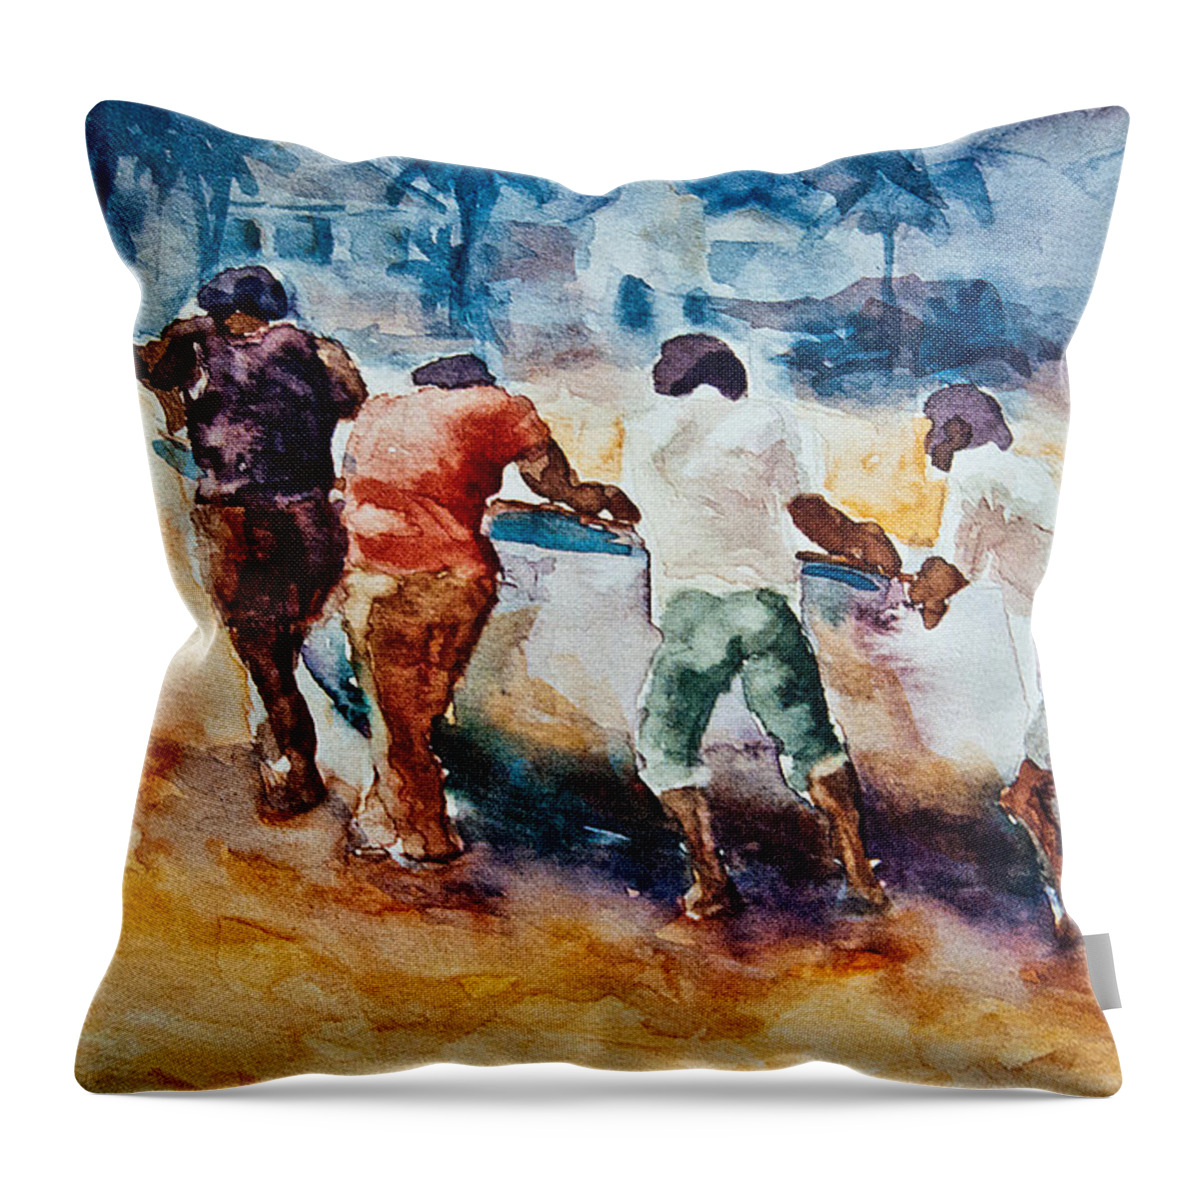 Tropical Throw Pillow featuring the painting Men At Work by Jani Freimann